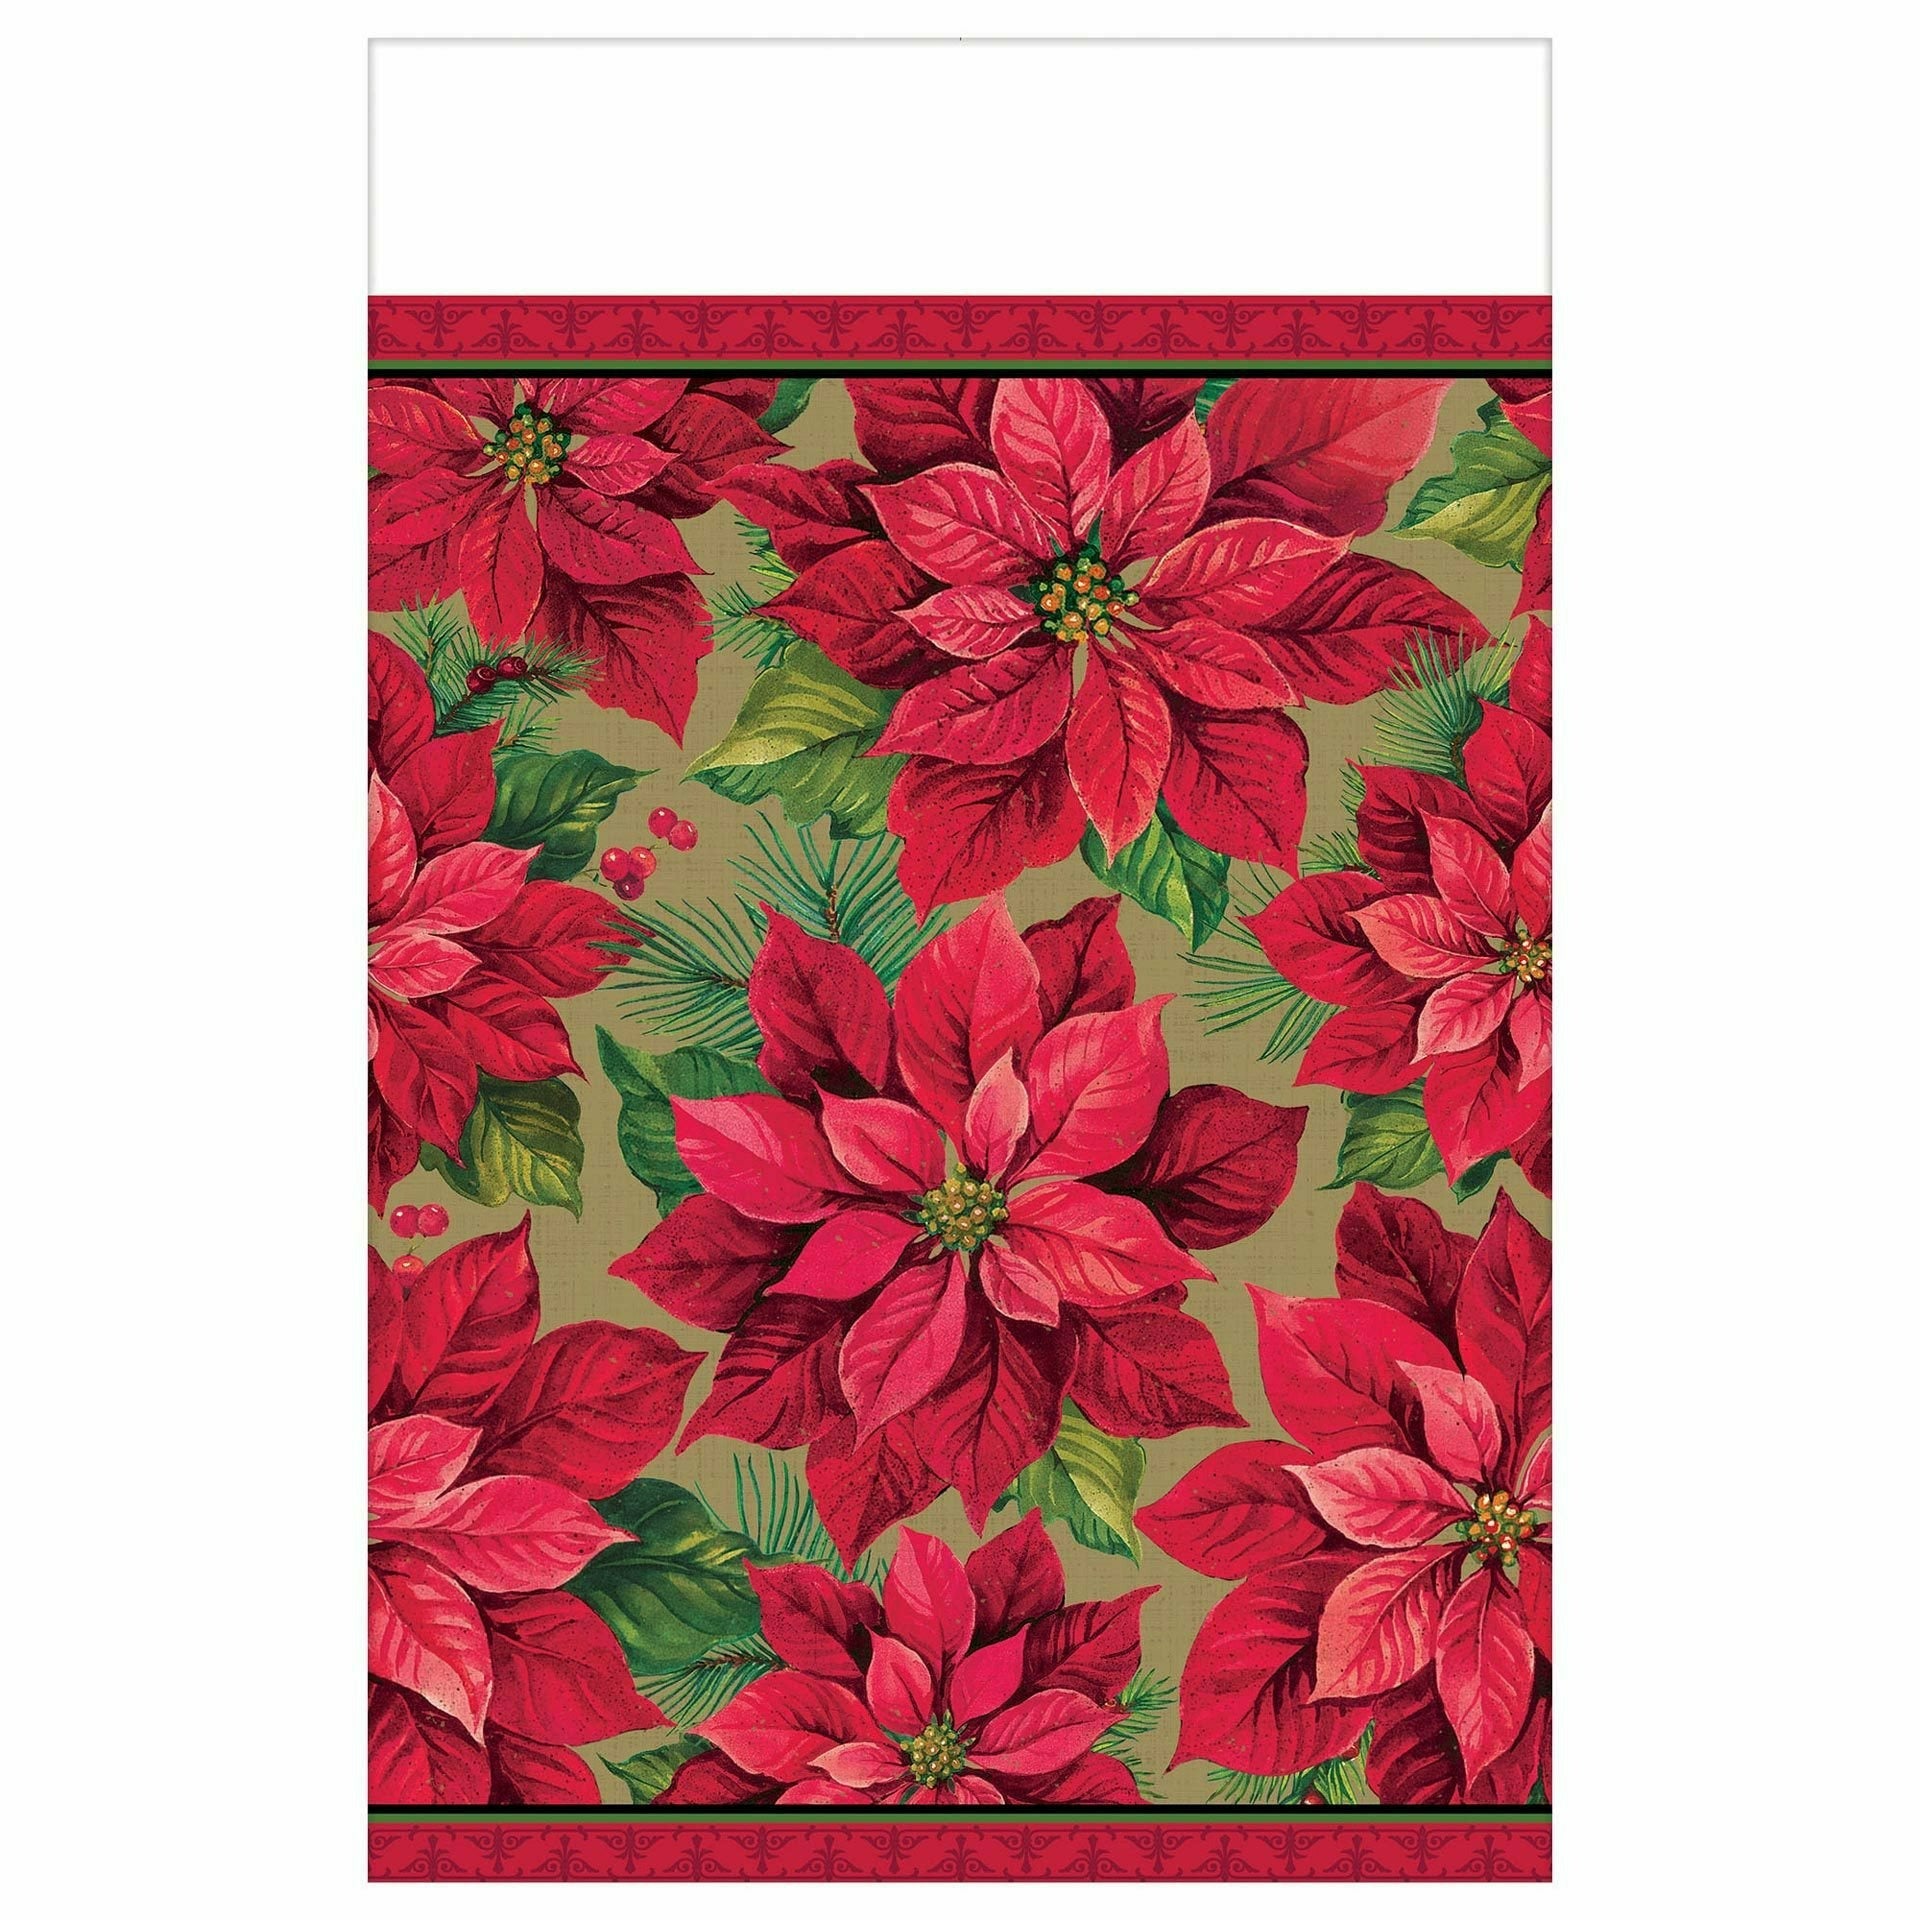 Amscan HOLIDAY: CHRISTMAS Holiday Poinsettia Paper Table Cover